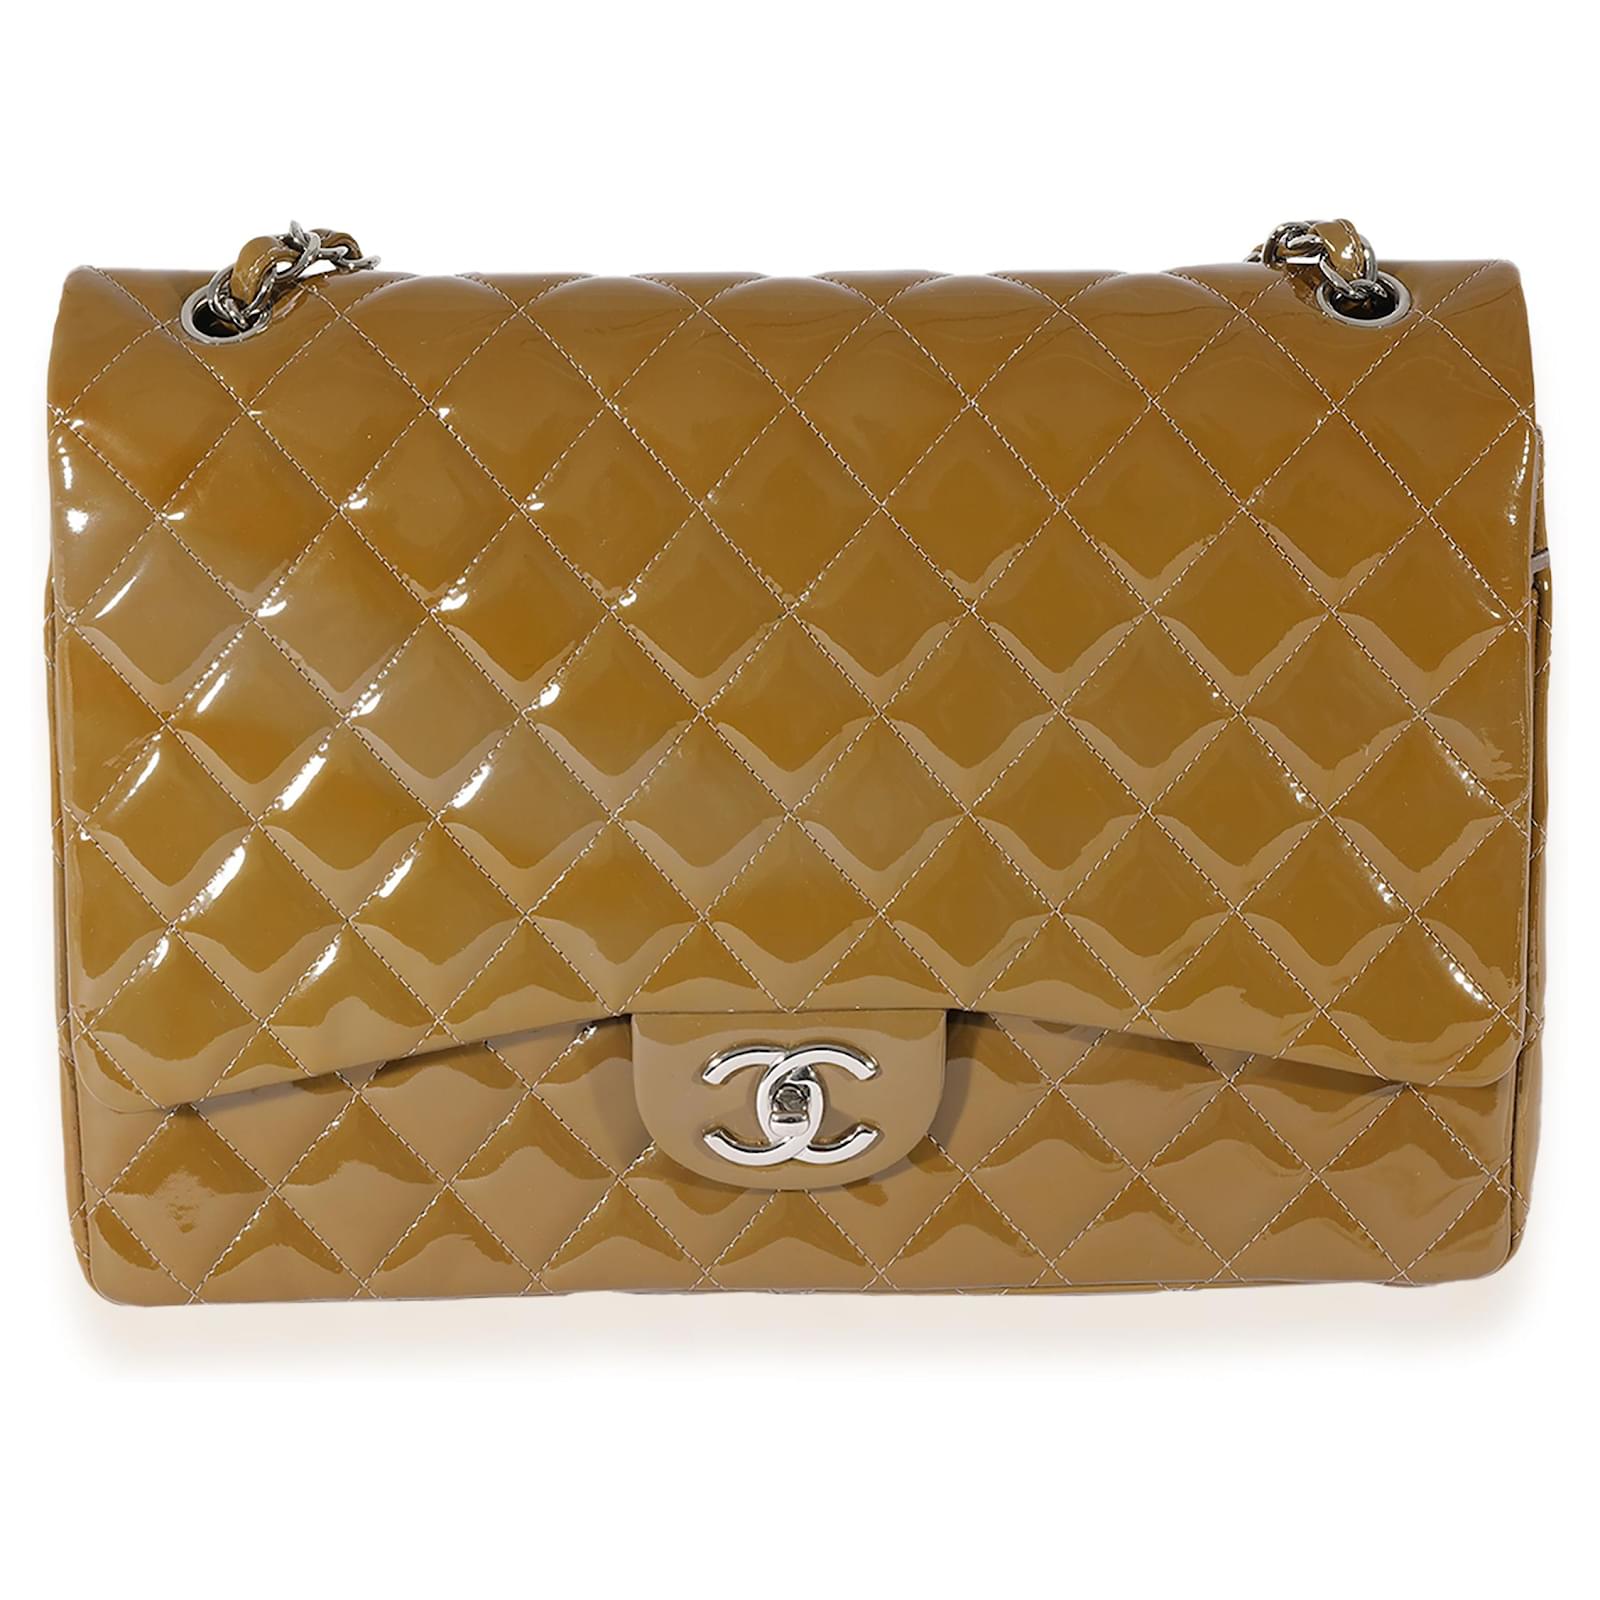 Chanel Pre-owned Timeless Jumbo Double Flap Shoulder Bag - Neutrals